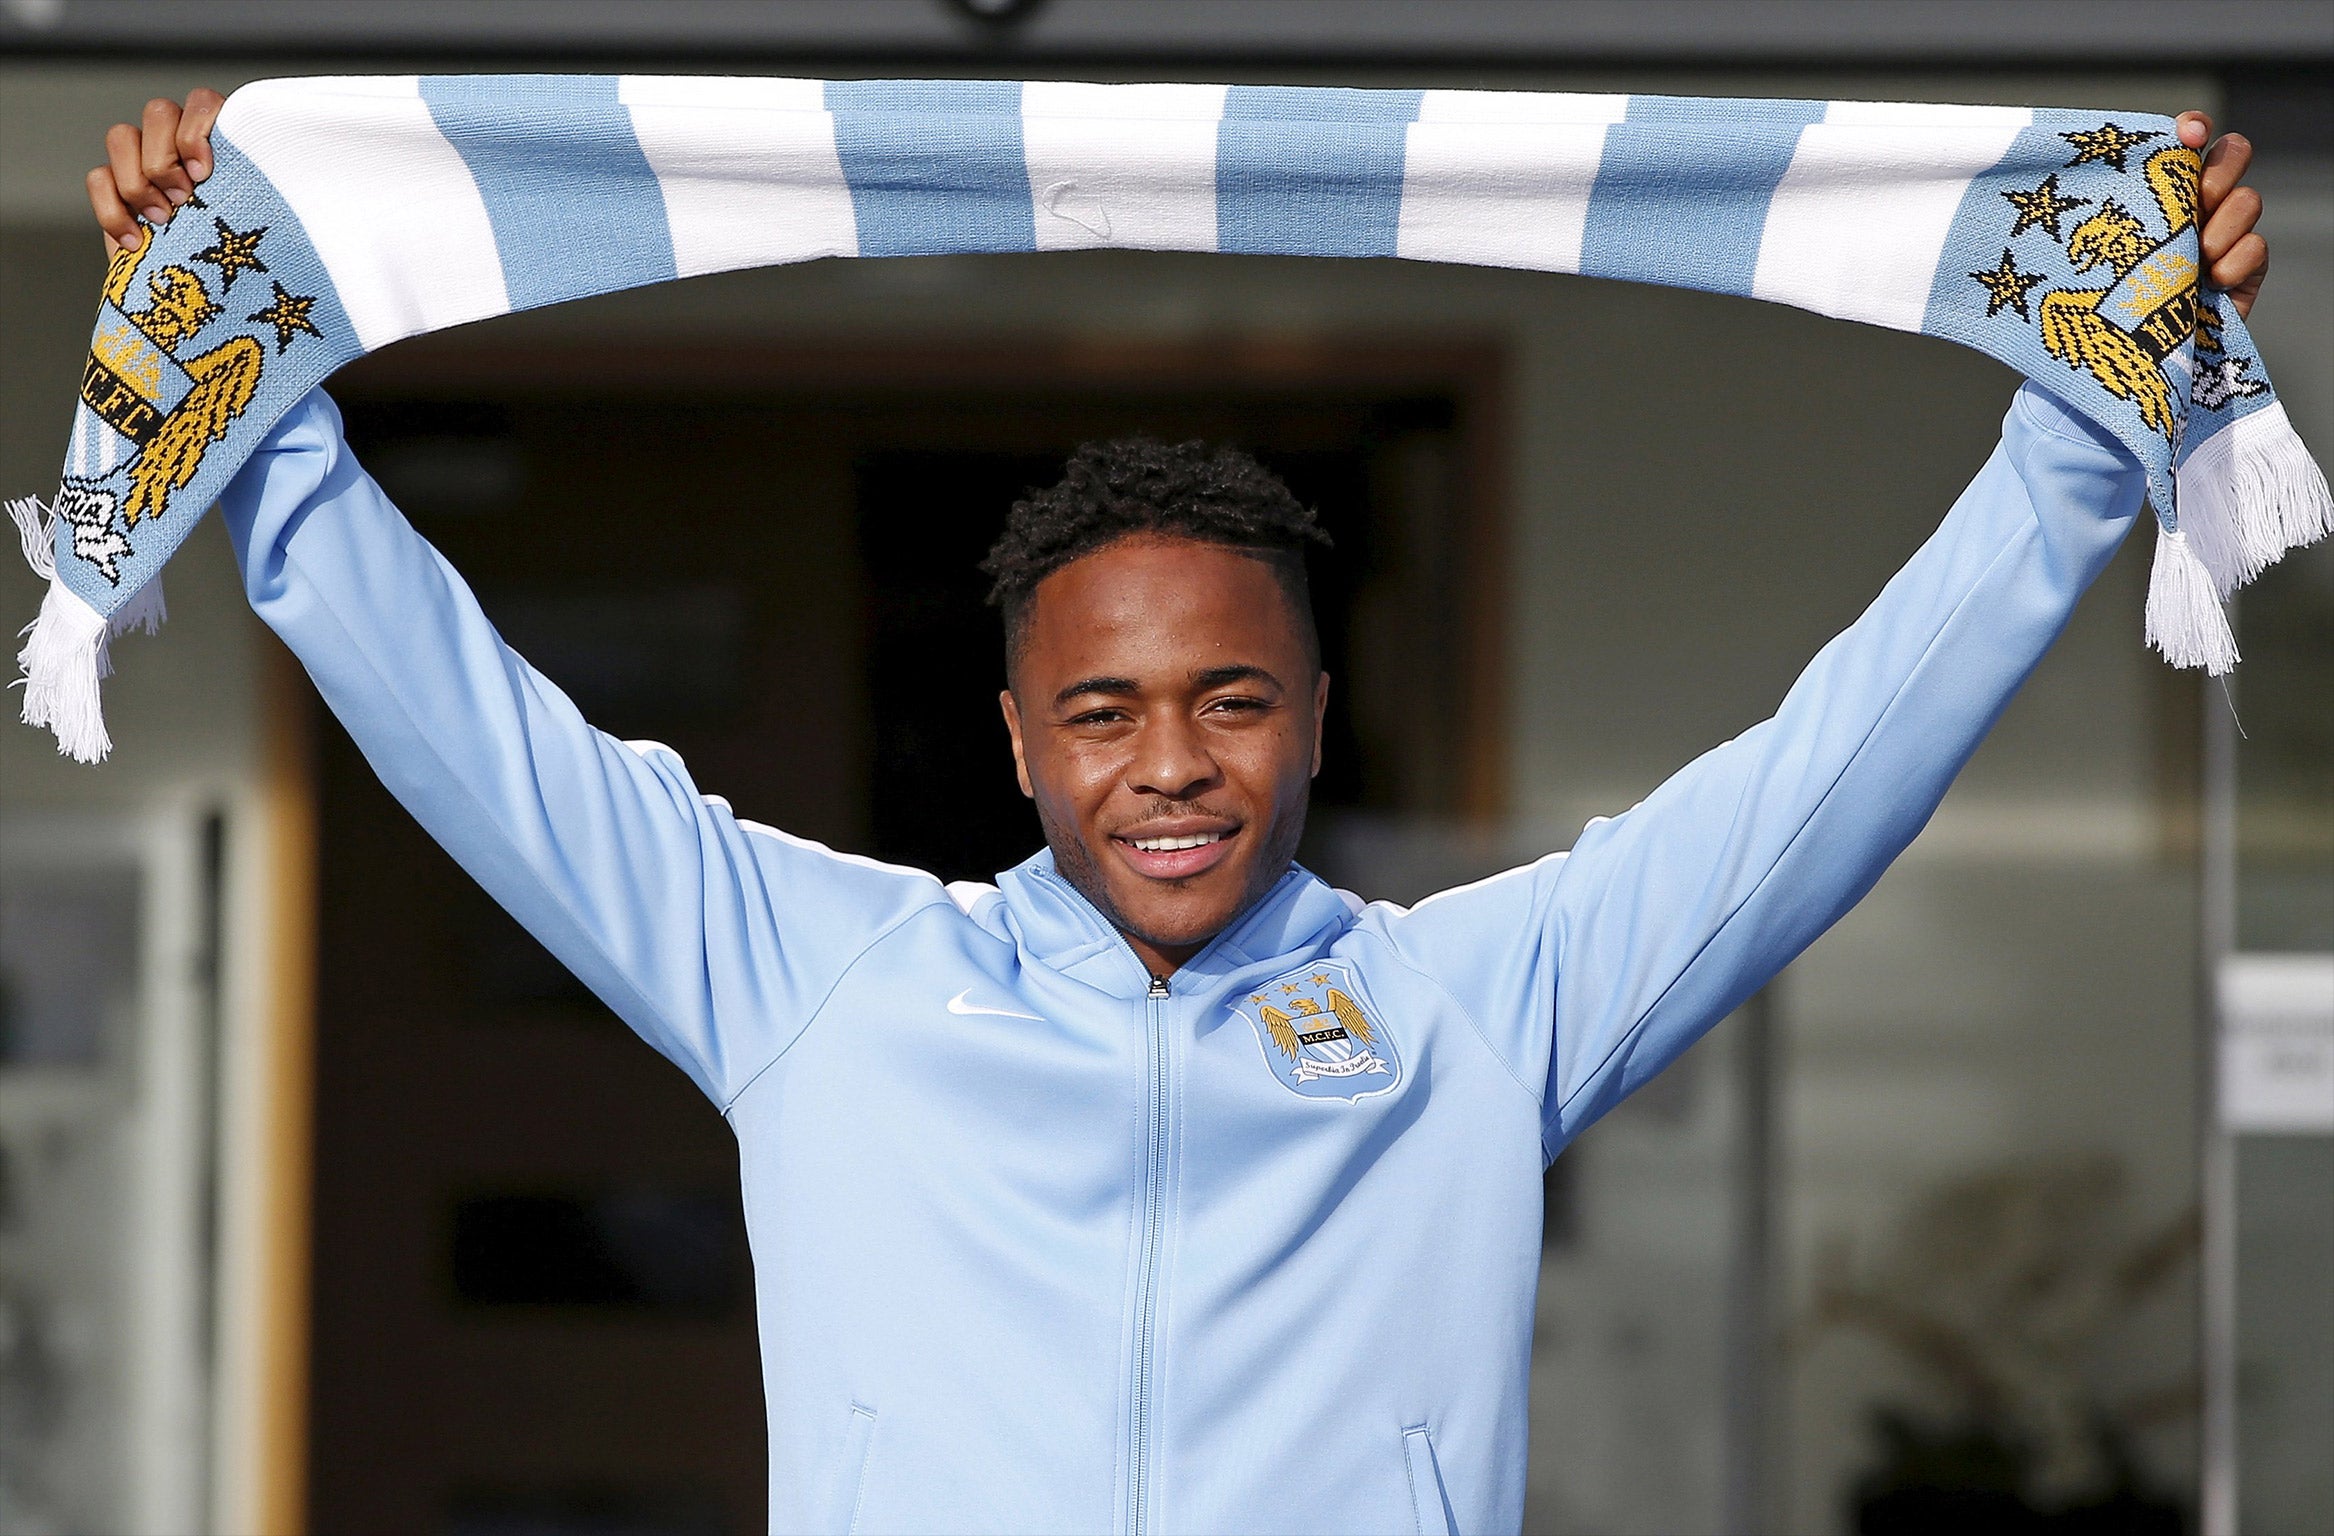 Sterling's new contract will see him earn around £200,000 a week